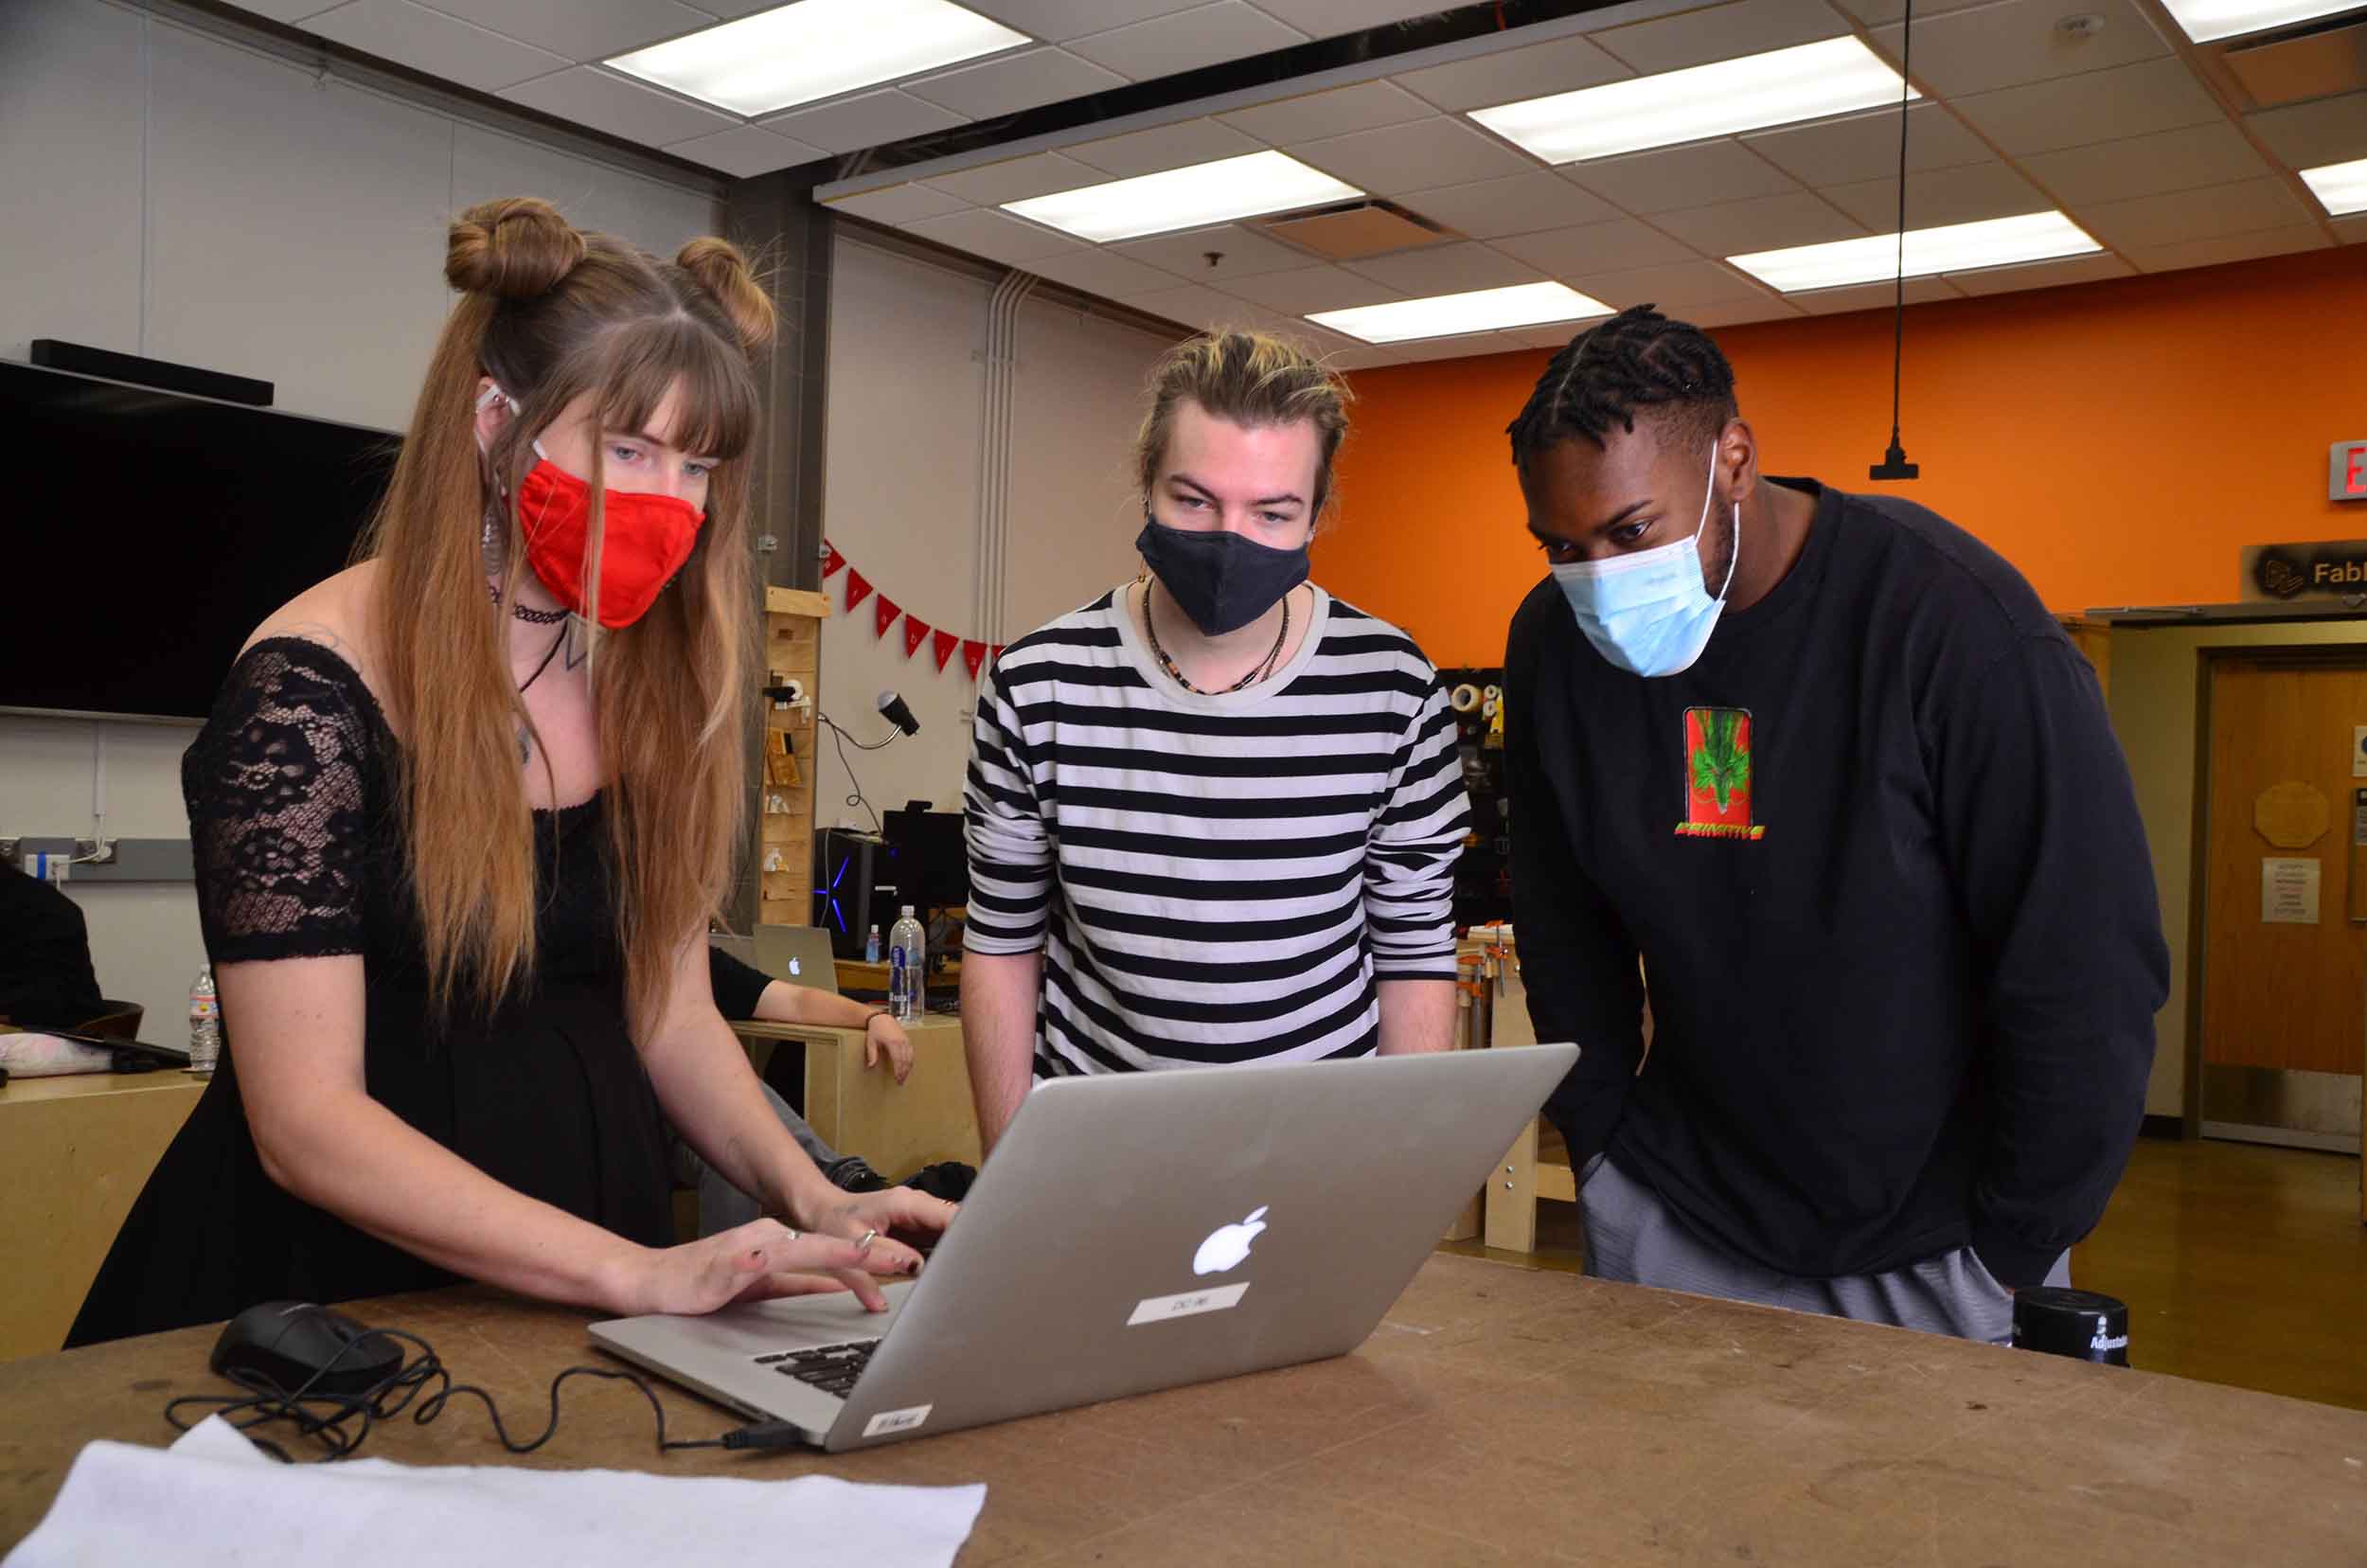 Three students in masks stand looking at a laptop during a FabLab workshop.